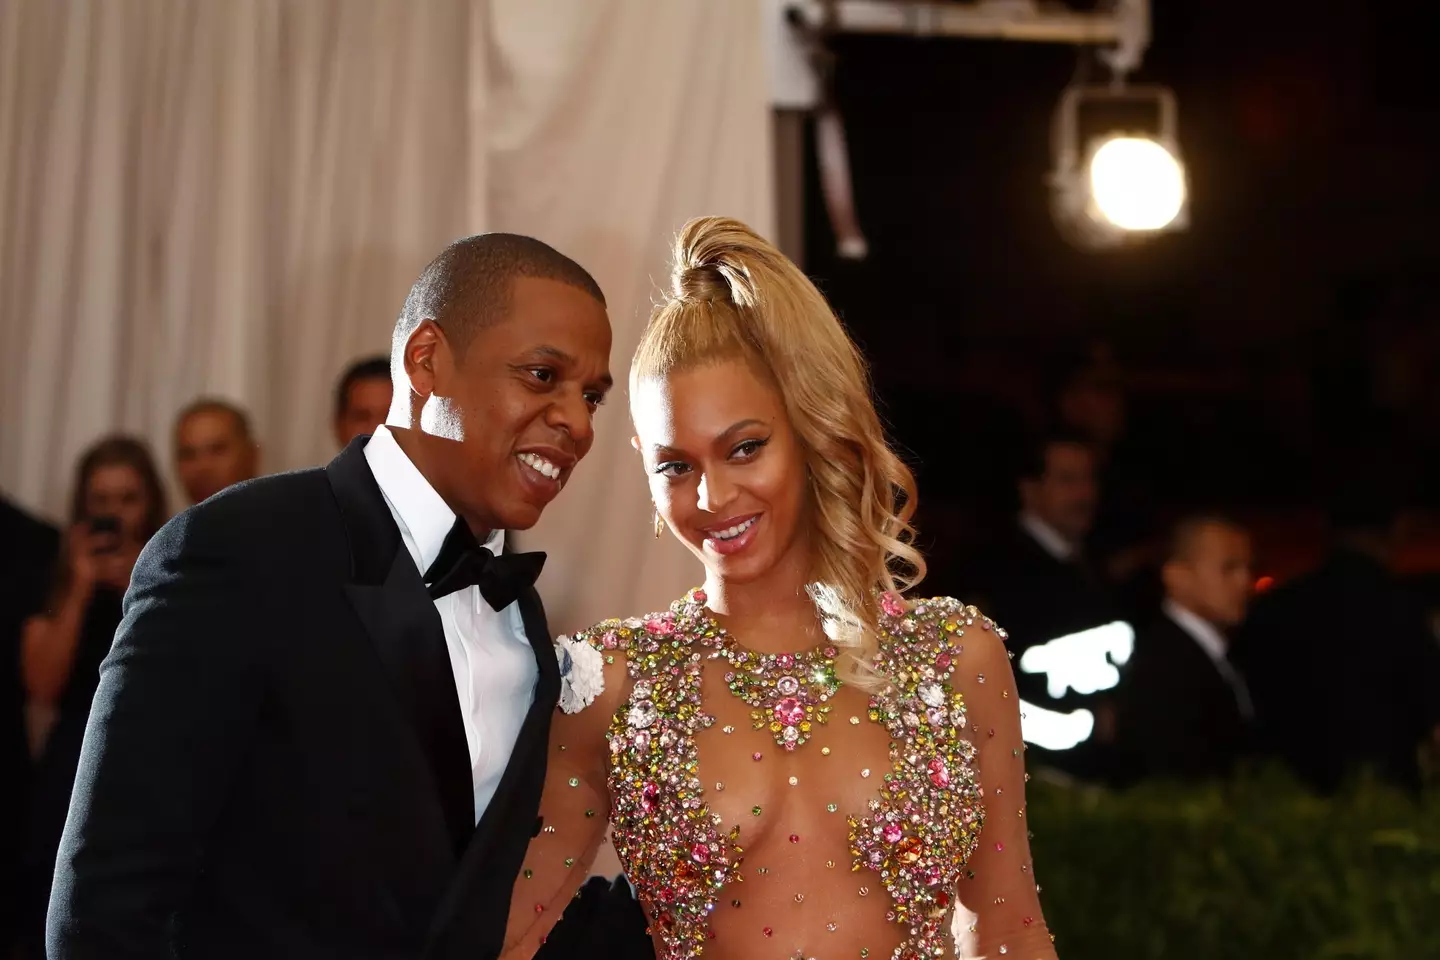 Jay-Z has spoken out about Beyoncé losing Album of the Year at the 2023 Grammys.